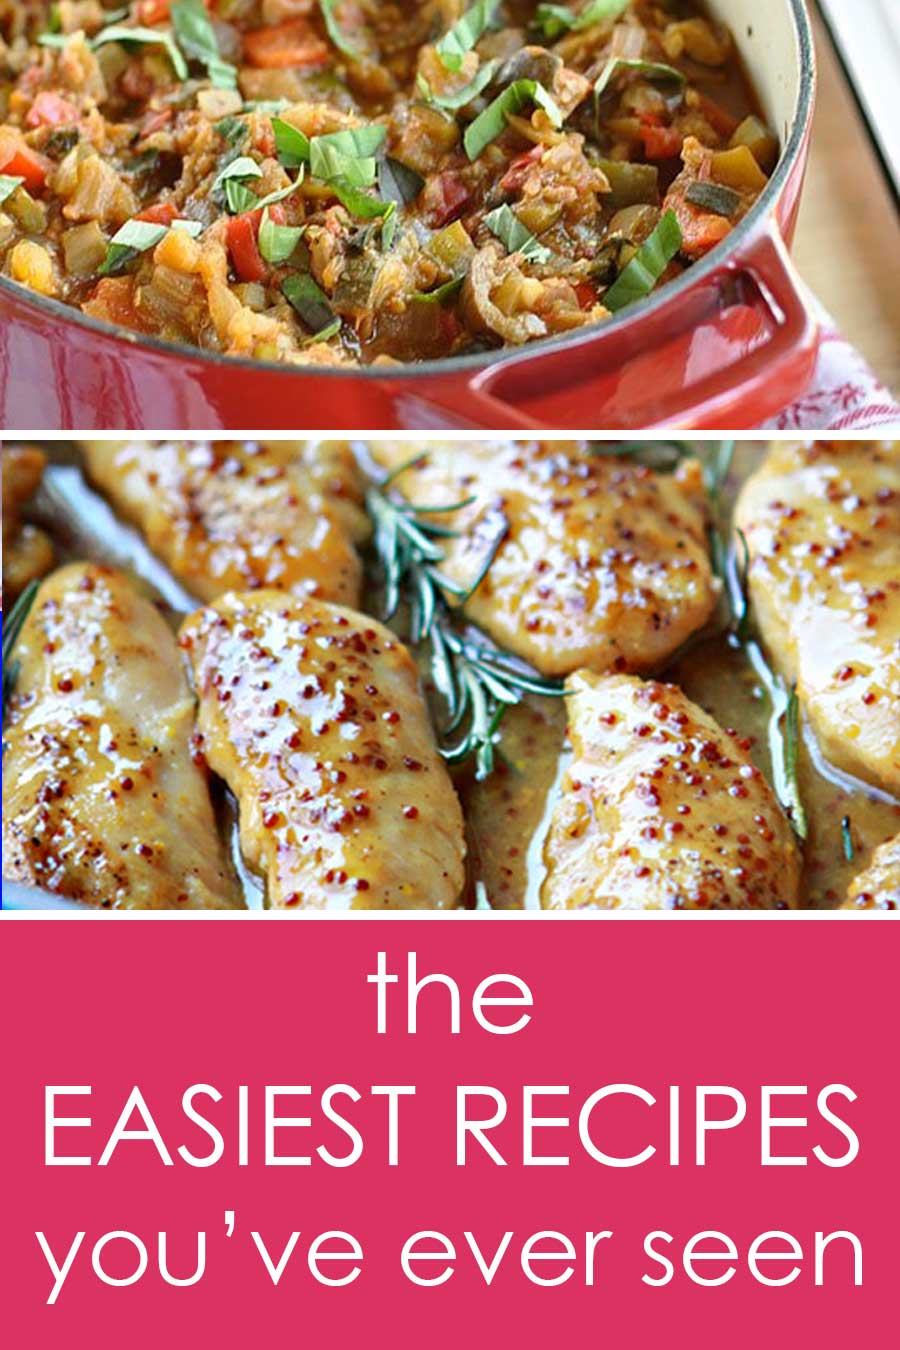 24 of the easiest recipes you've ever seen